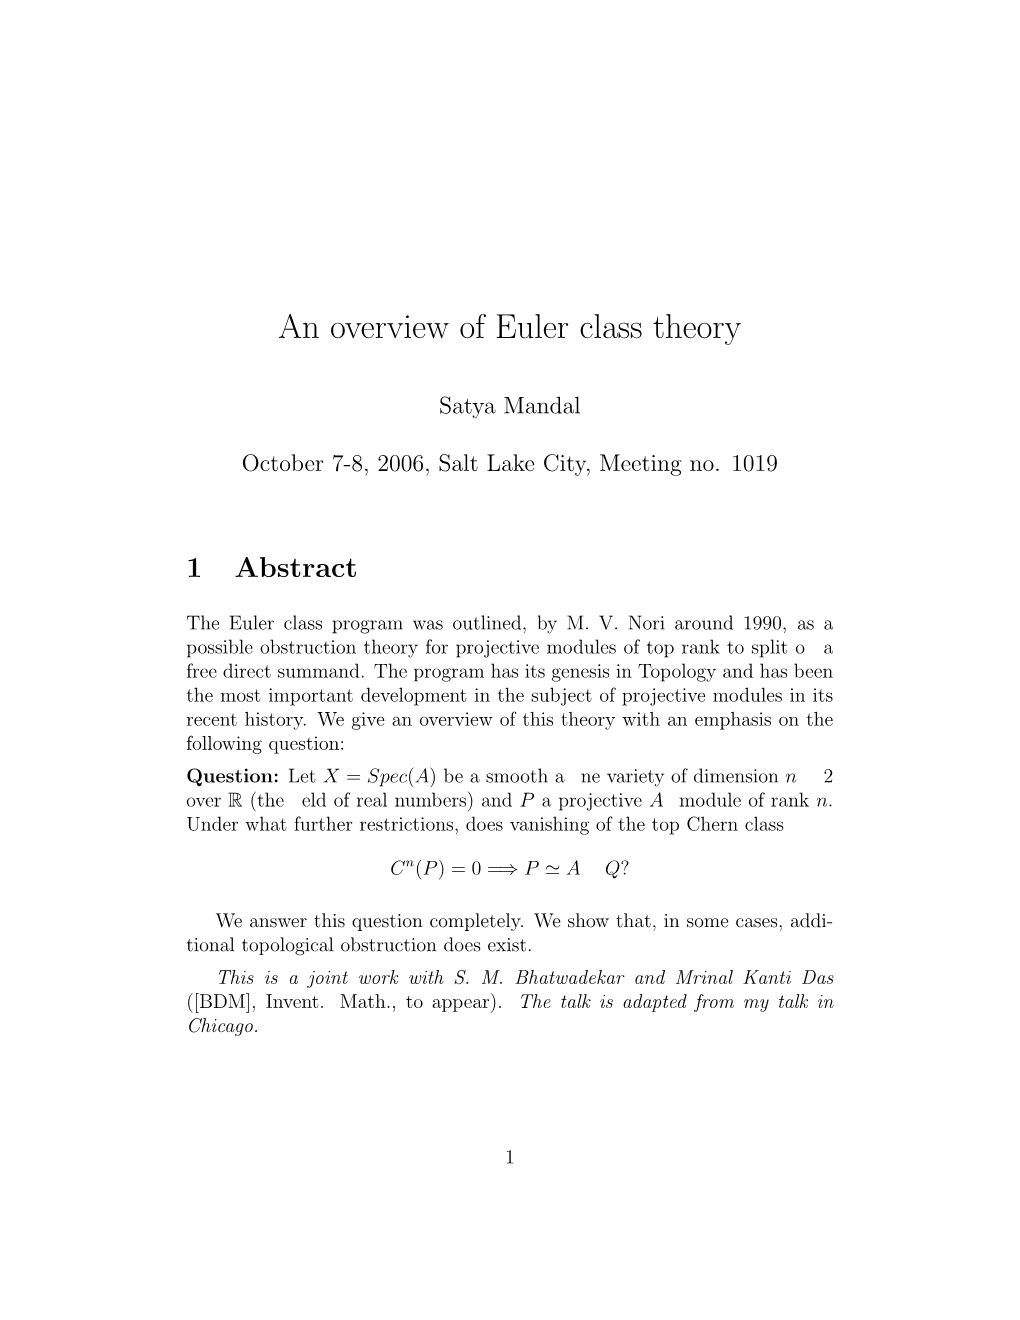 An Overview of Euler Class Theory